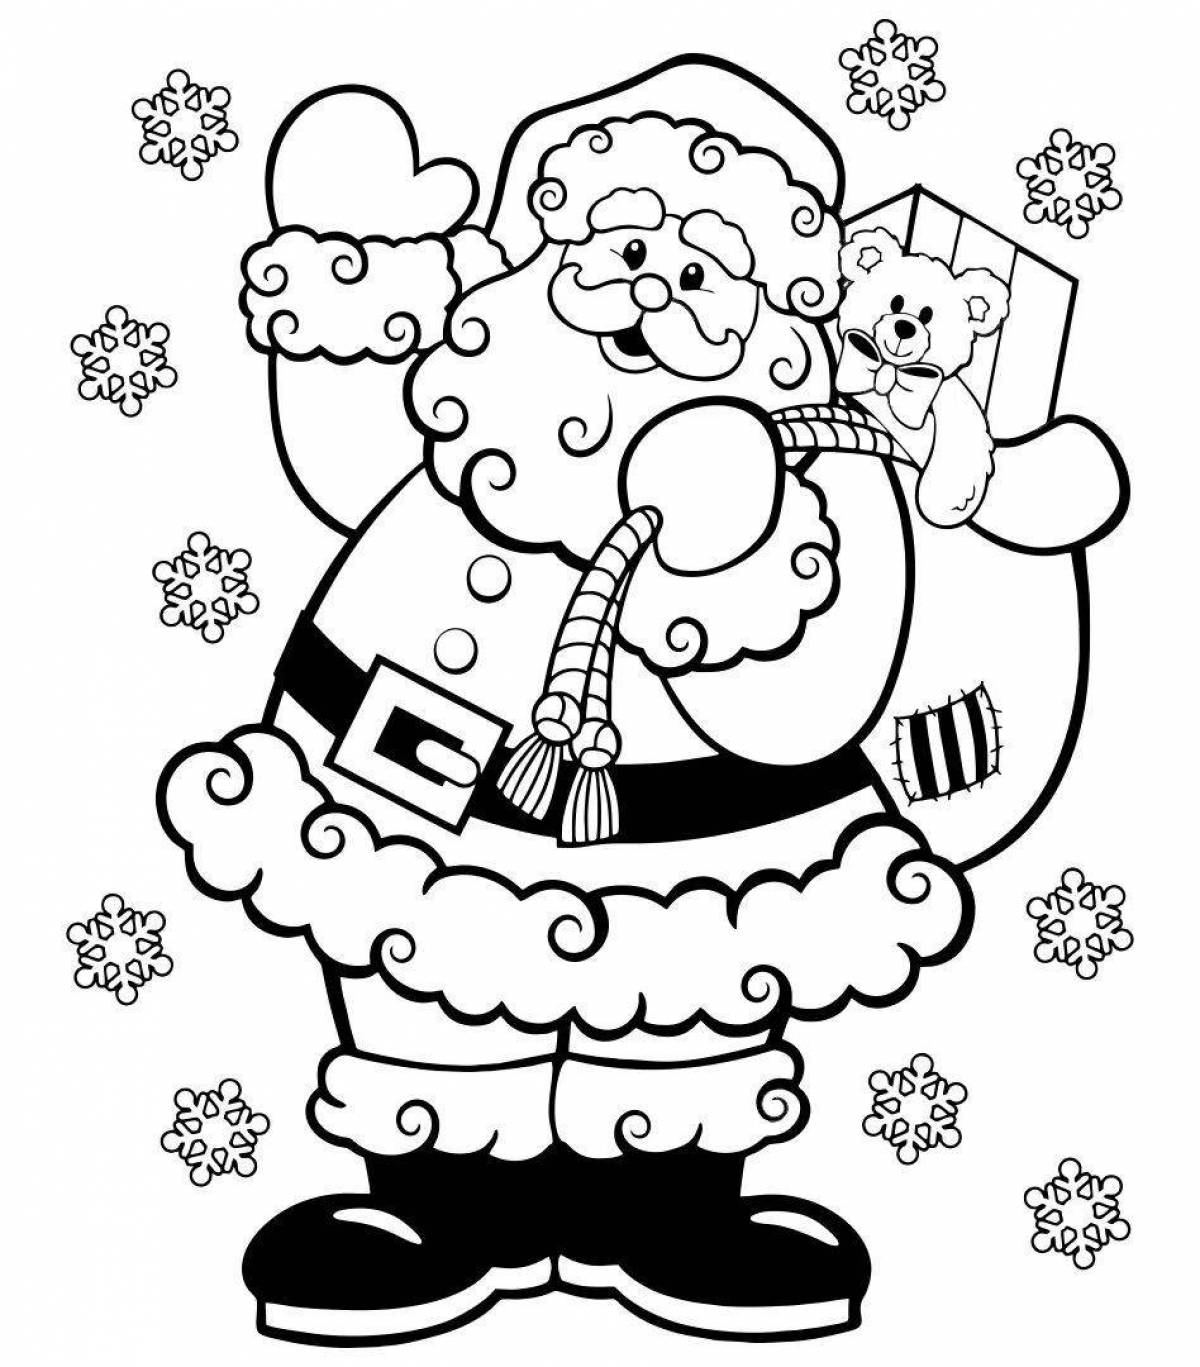 Glowing santa claus coloring page for girls